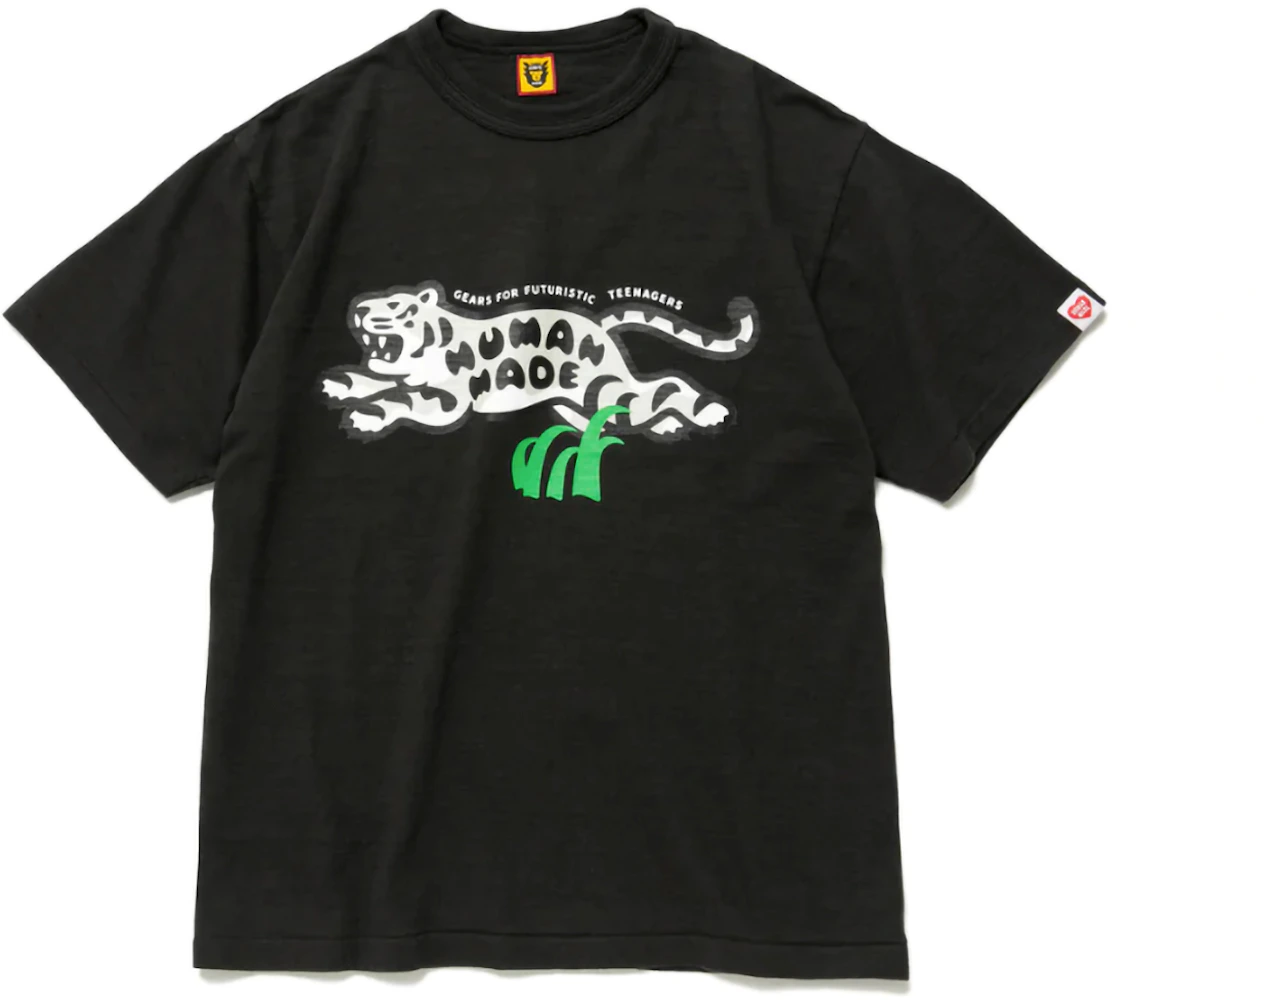 Buy Human Made HUMAN MADE Size: L 22AW GRAPHIC T-SHIRT #01 Tiger Tiger print  T-shirt from Japan - Buy authentic Plus exclusive items from Japan